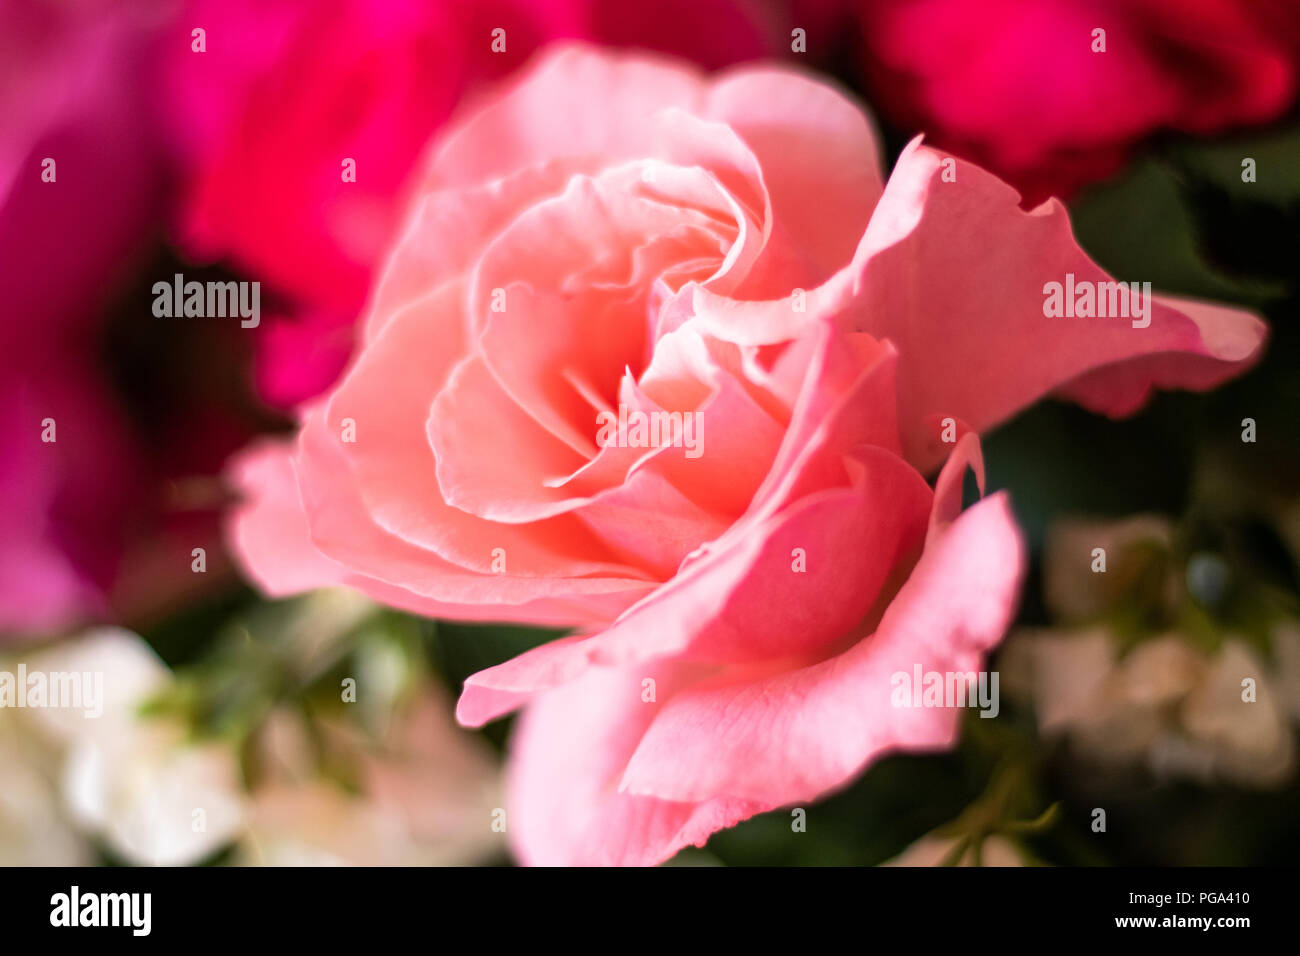 Pink rose flower detailed picture Stock Photo - Alamy